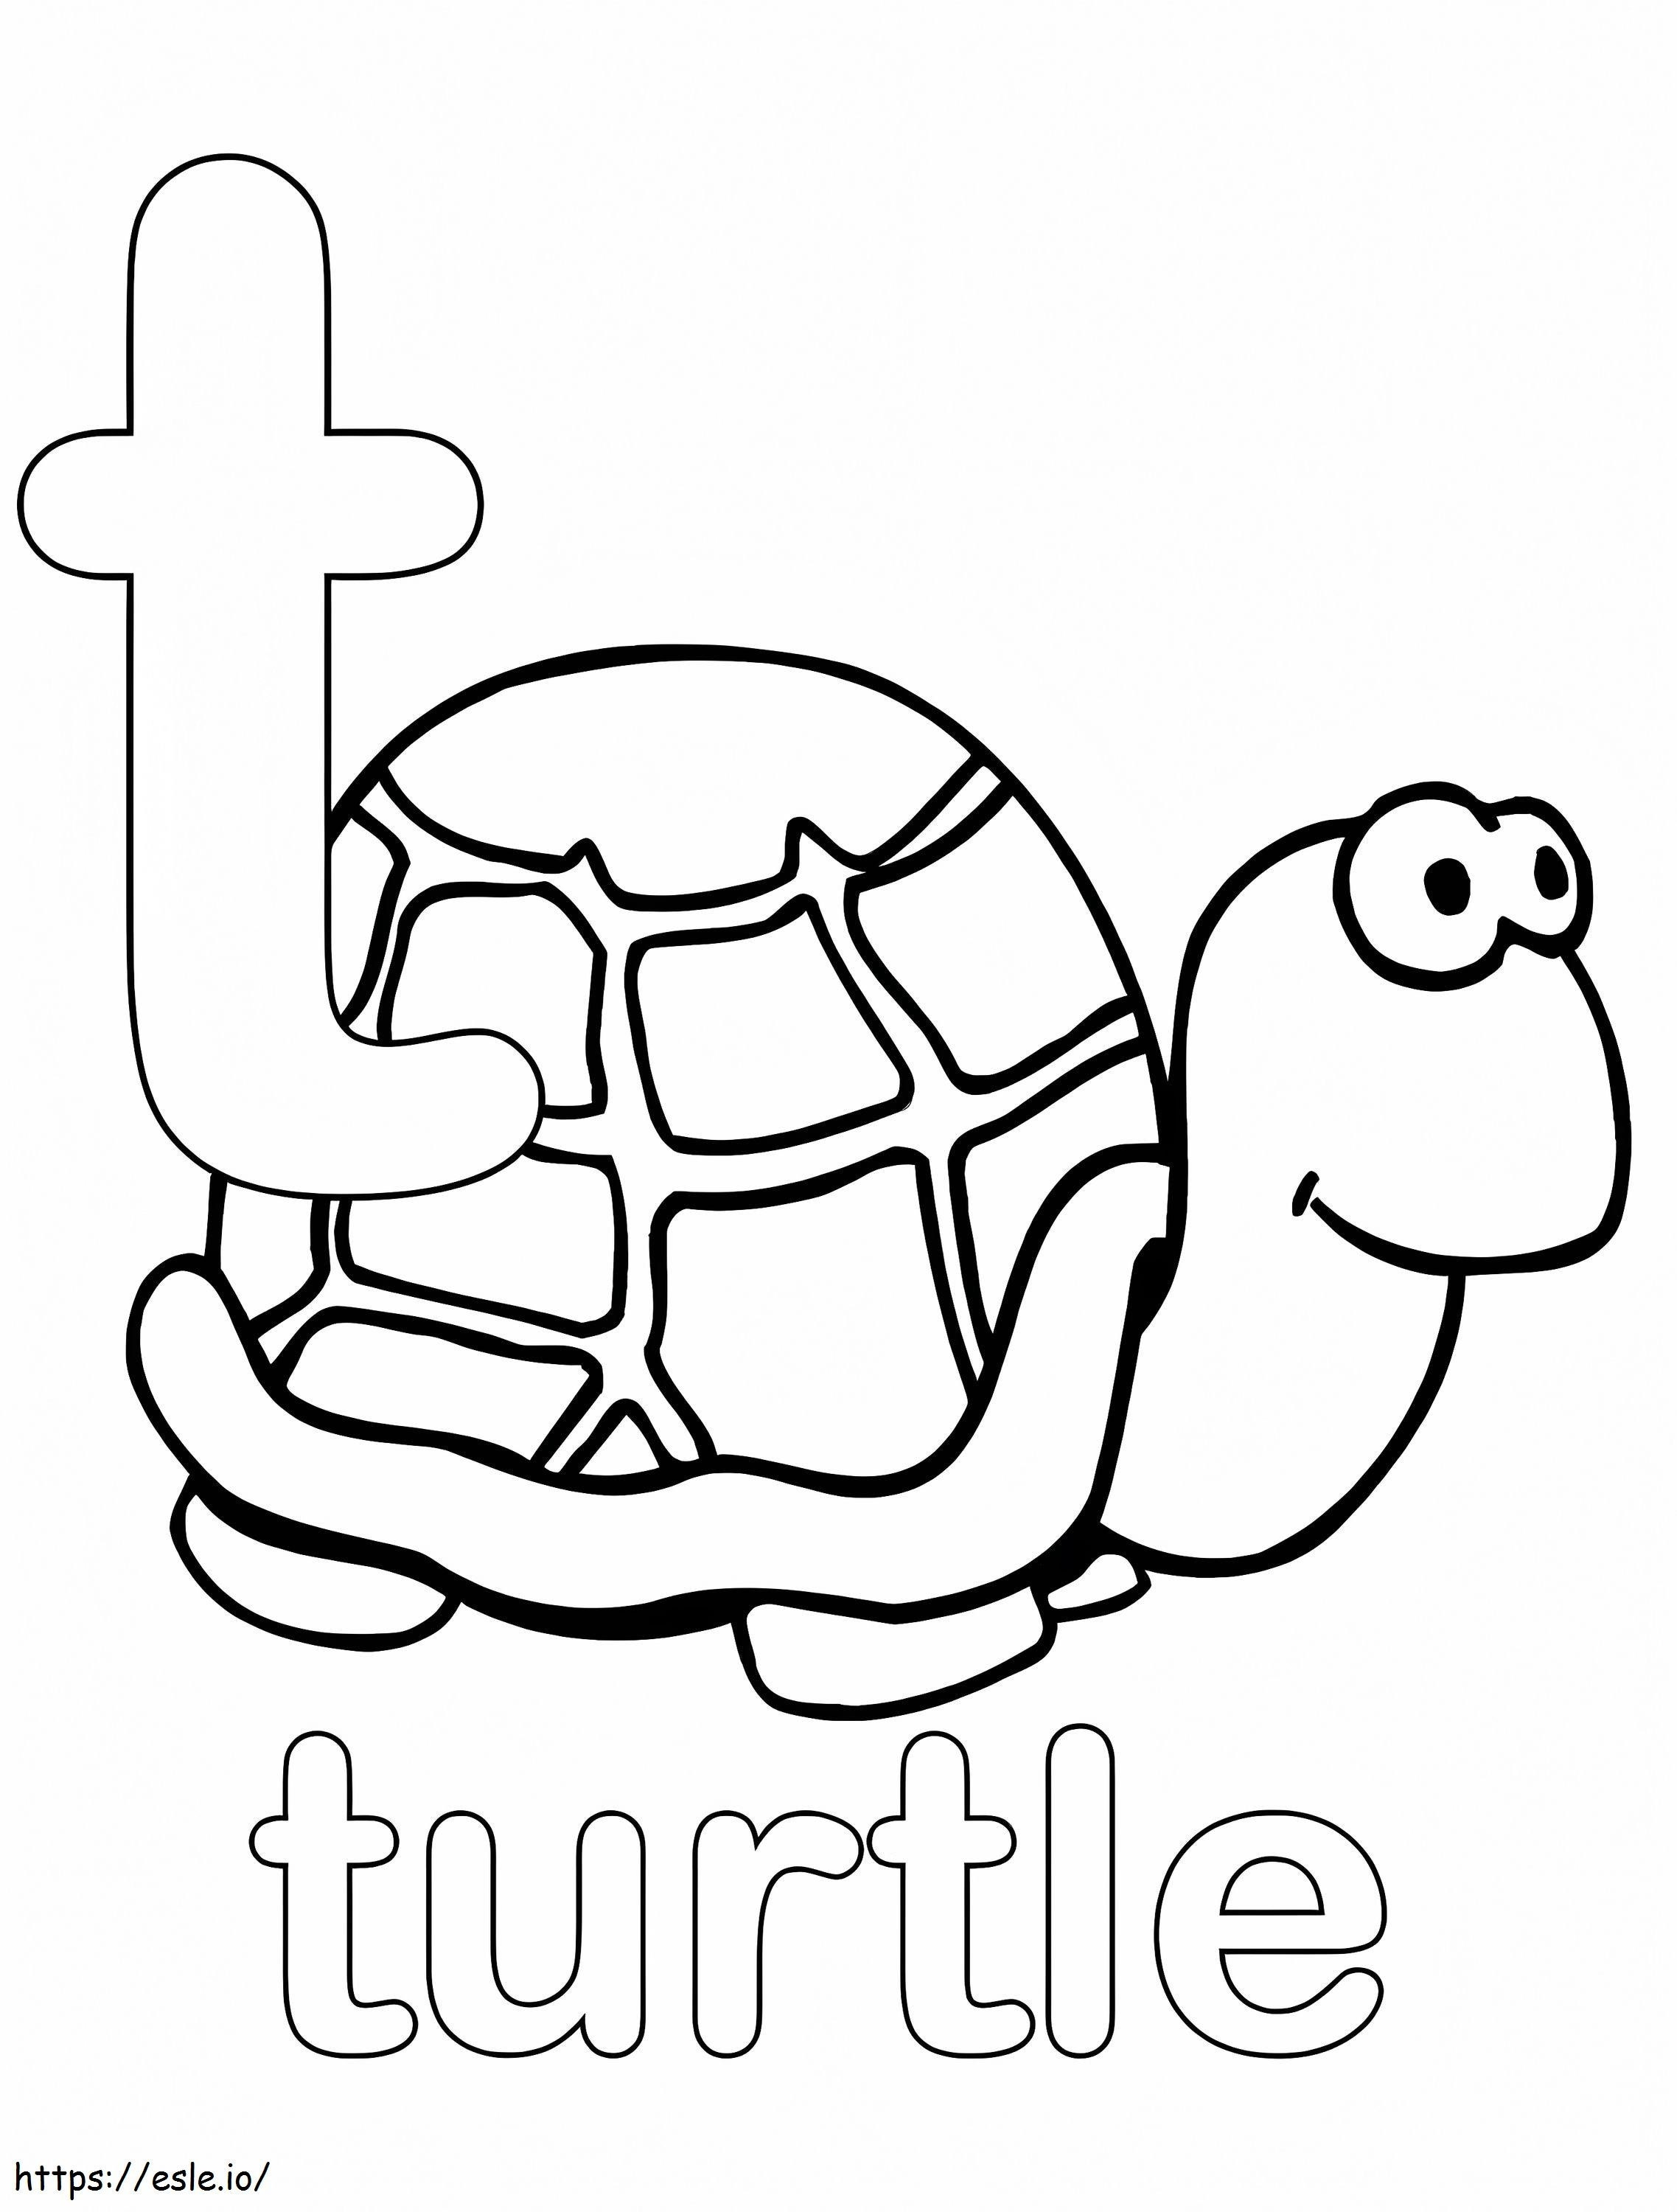 Cute Turtle Letter T coloring page